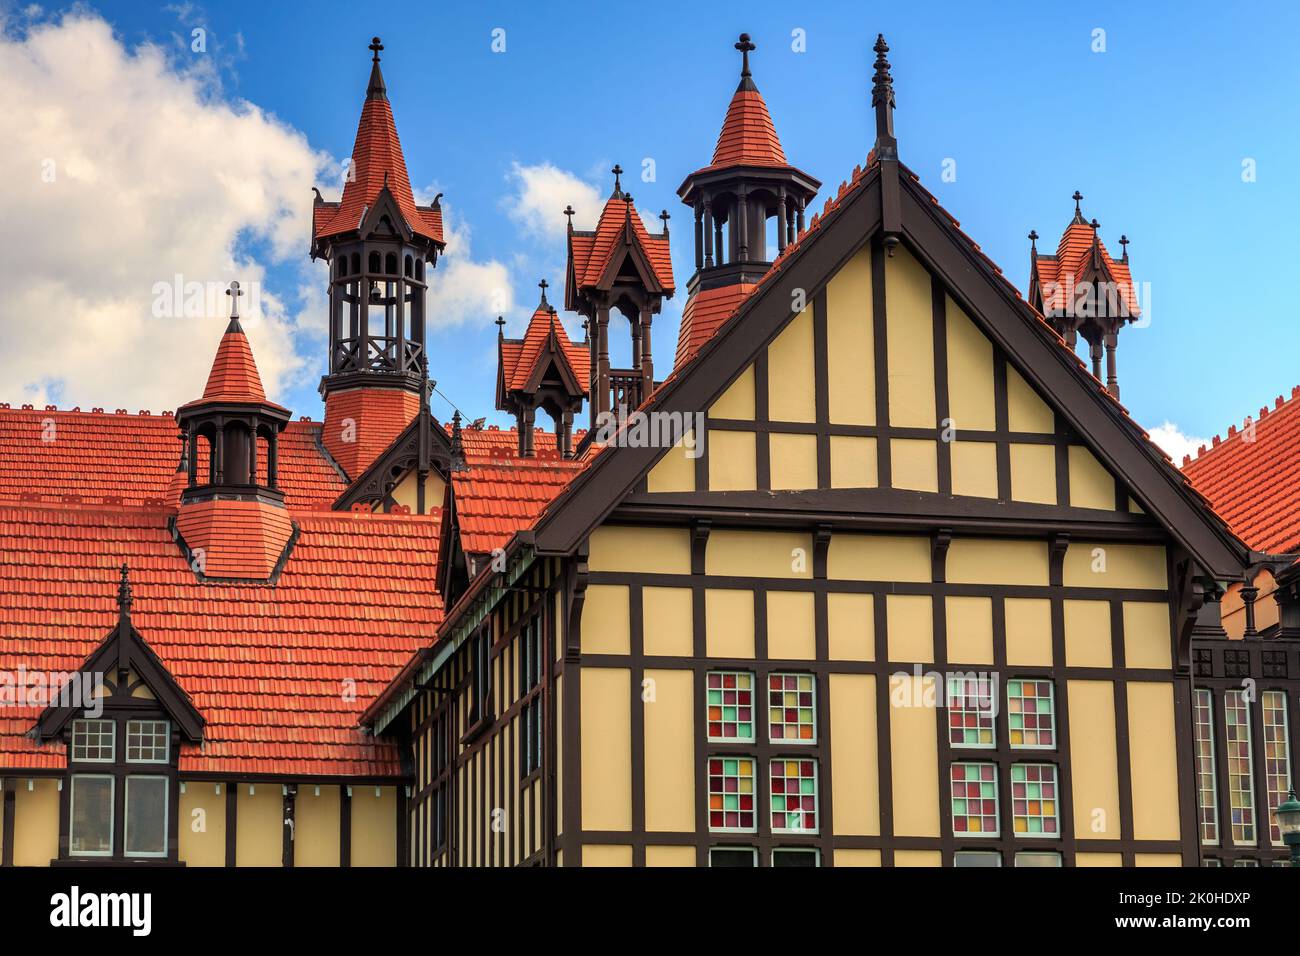 Decorative spires on the roof of the Rotorua Museum, formerly the Bath House, a 1908 Elizabethan Revival building in Rotorua, New Zealand Stock Photo